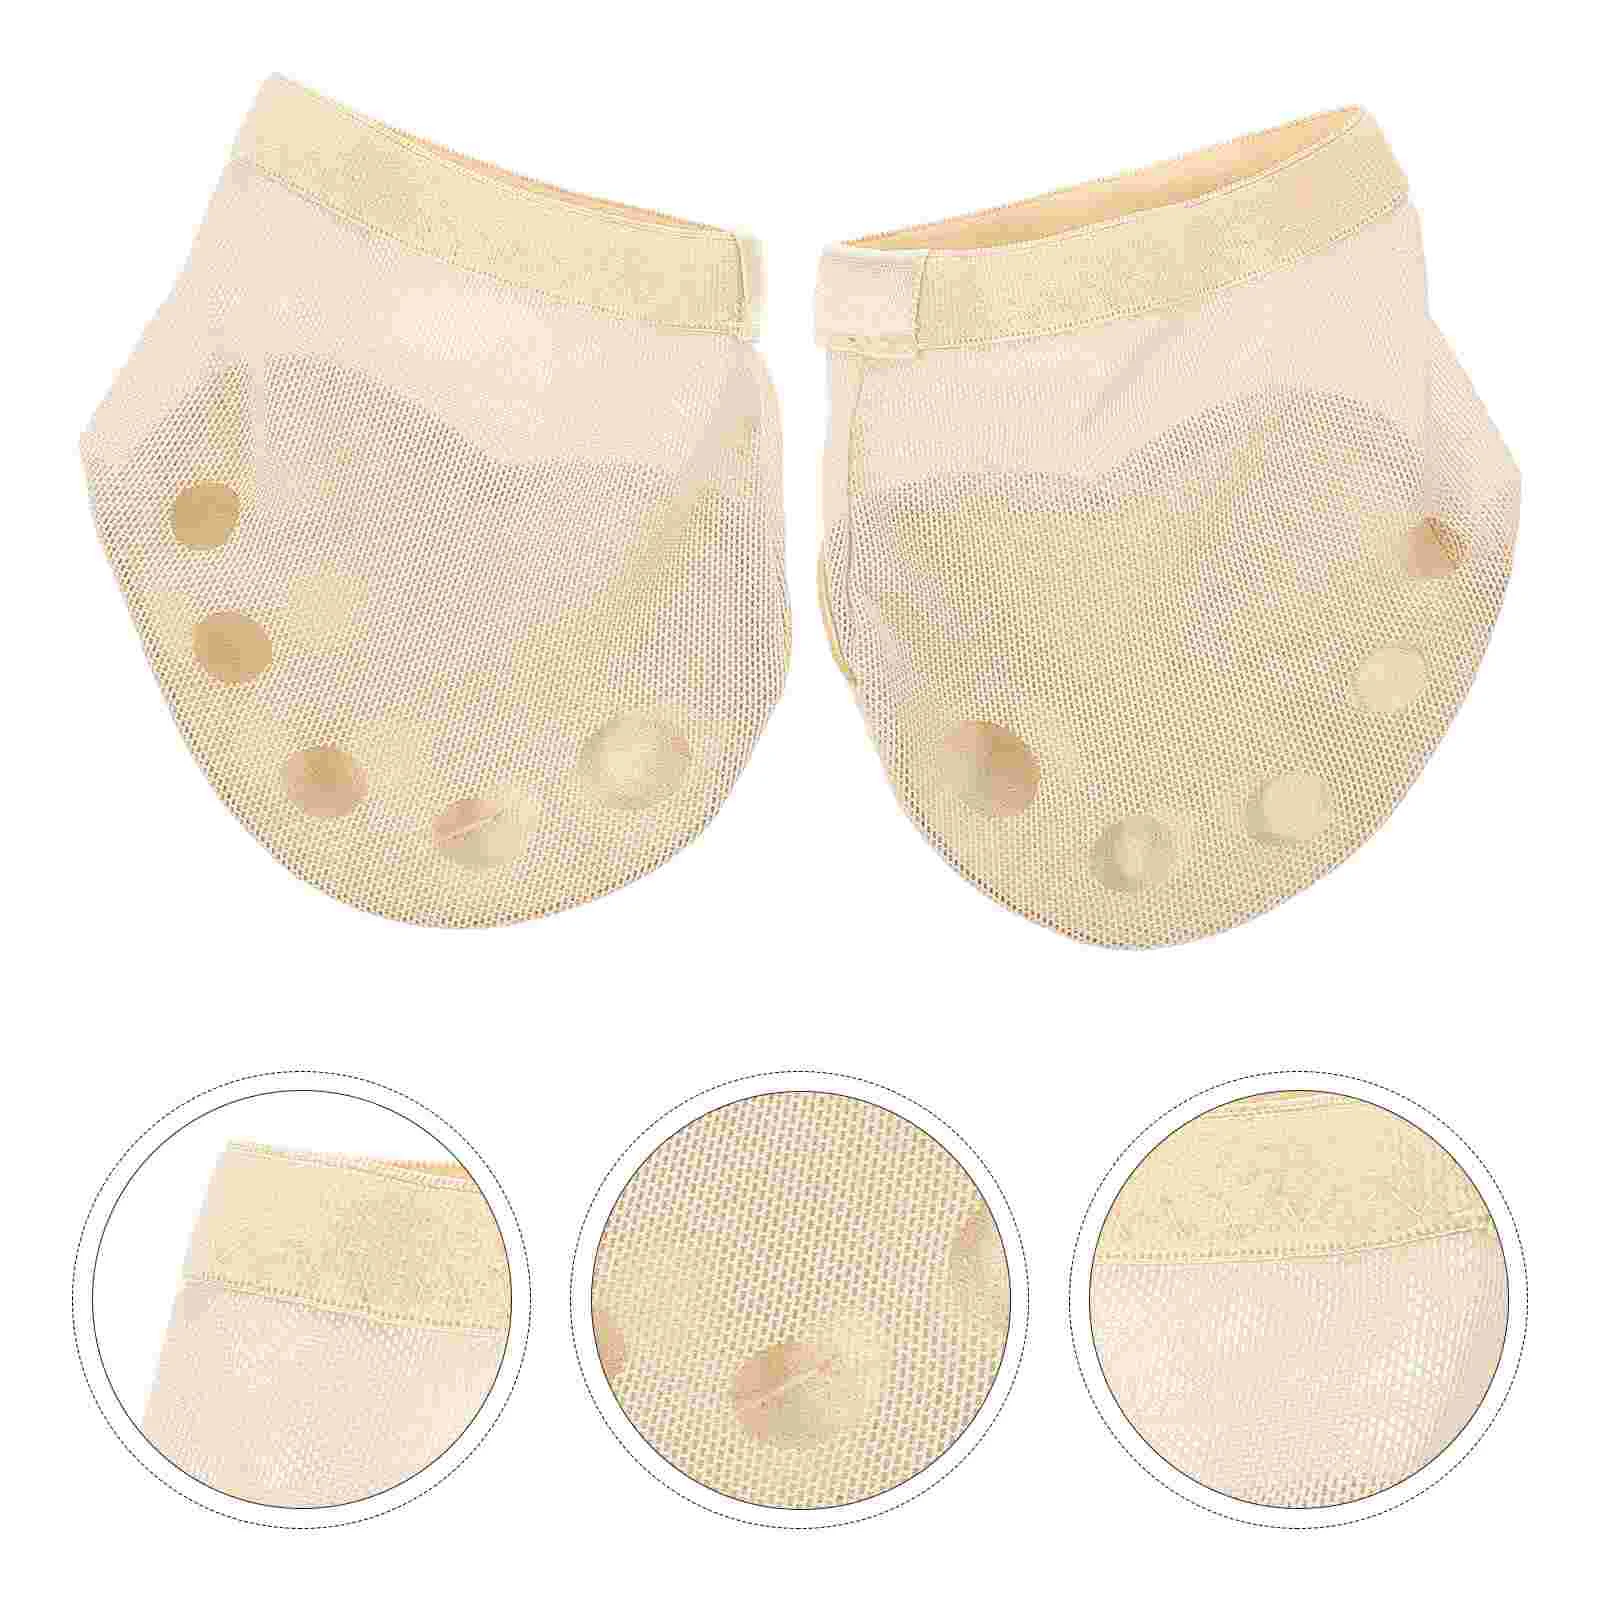 1 Pair Five Holes Half Socks Forefoot Cushion Protective Foot Paw Foot Care Supplies for Ballet Size S 20 sheets half ripe xuan paper chinese calligraphy rice paper painting papel arroz vintage batik paper handicraft supplies